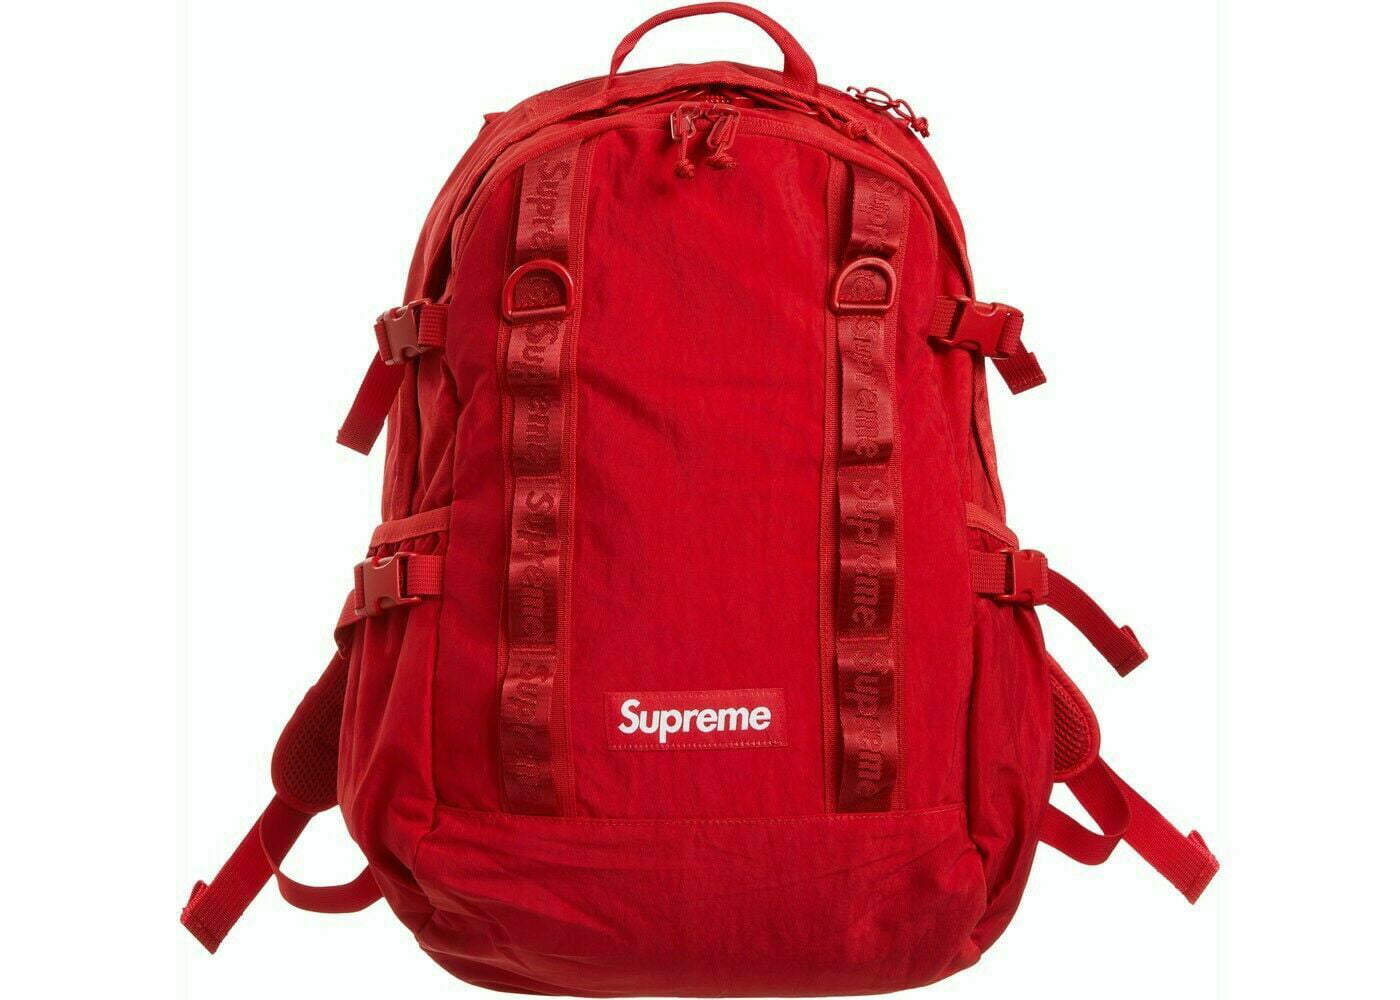 Supreme Backpack Red FW20 100% Authentic Brand New